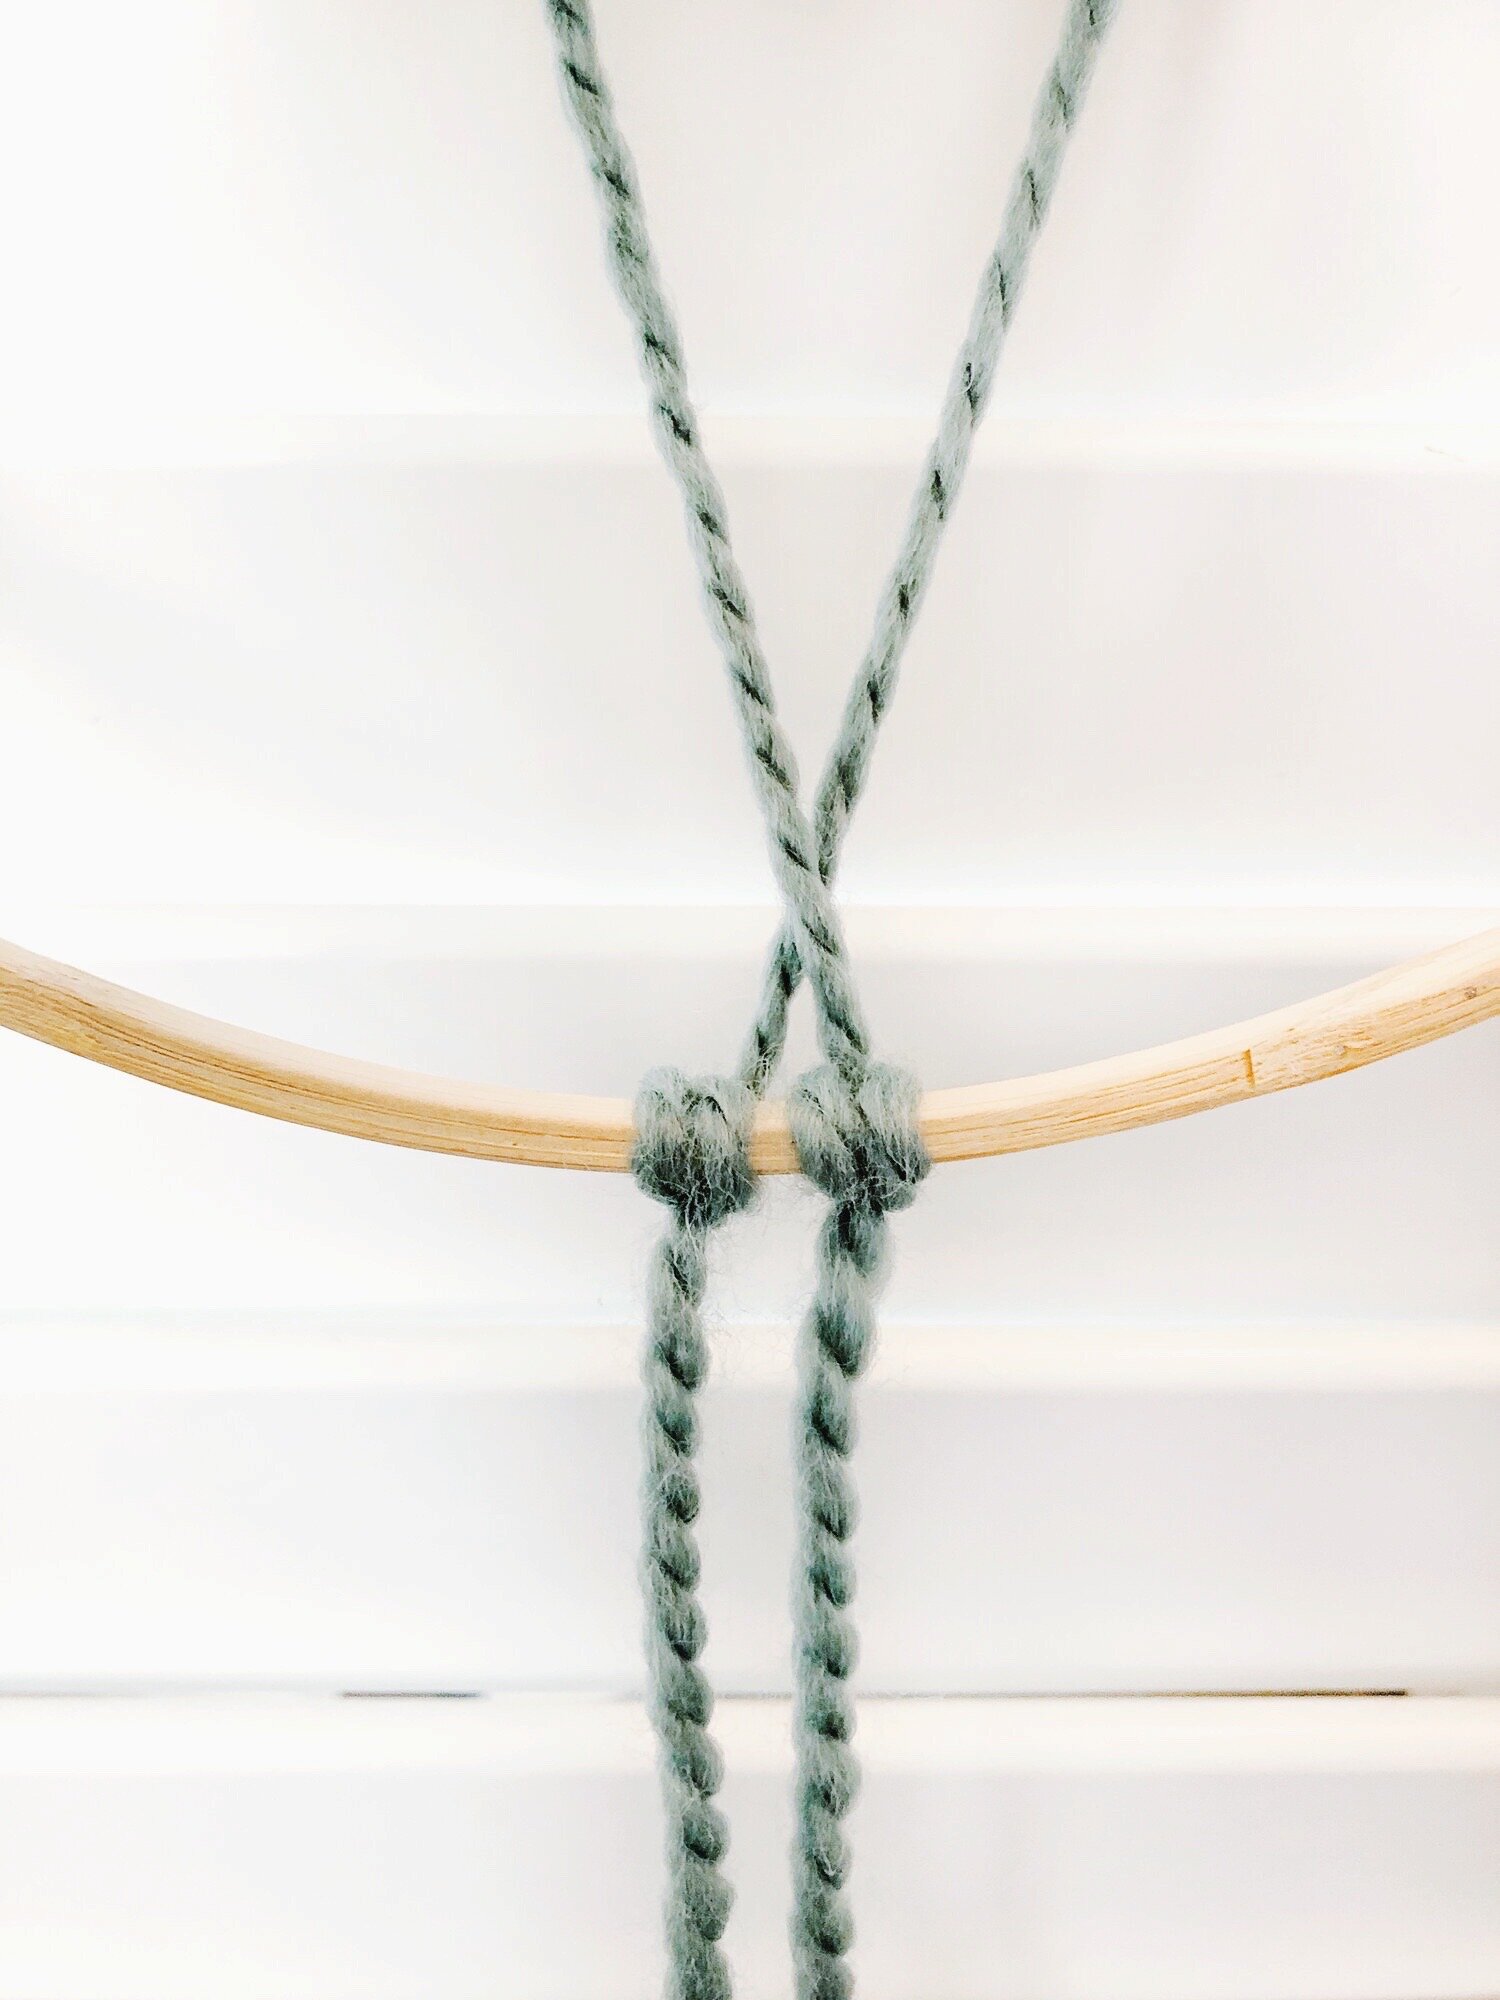  Starting with the outermost strand, bring it behind the other strands and behind the ring. Attach it with a double half hitch knot. Keep it centered as much as possible. 